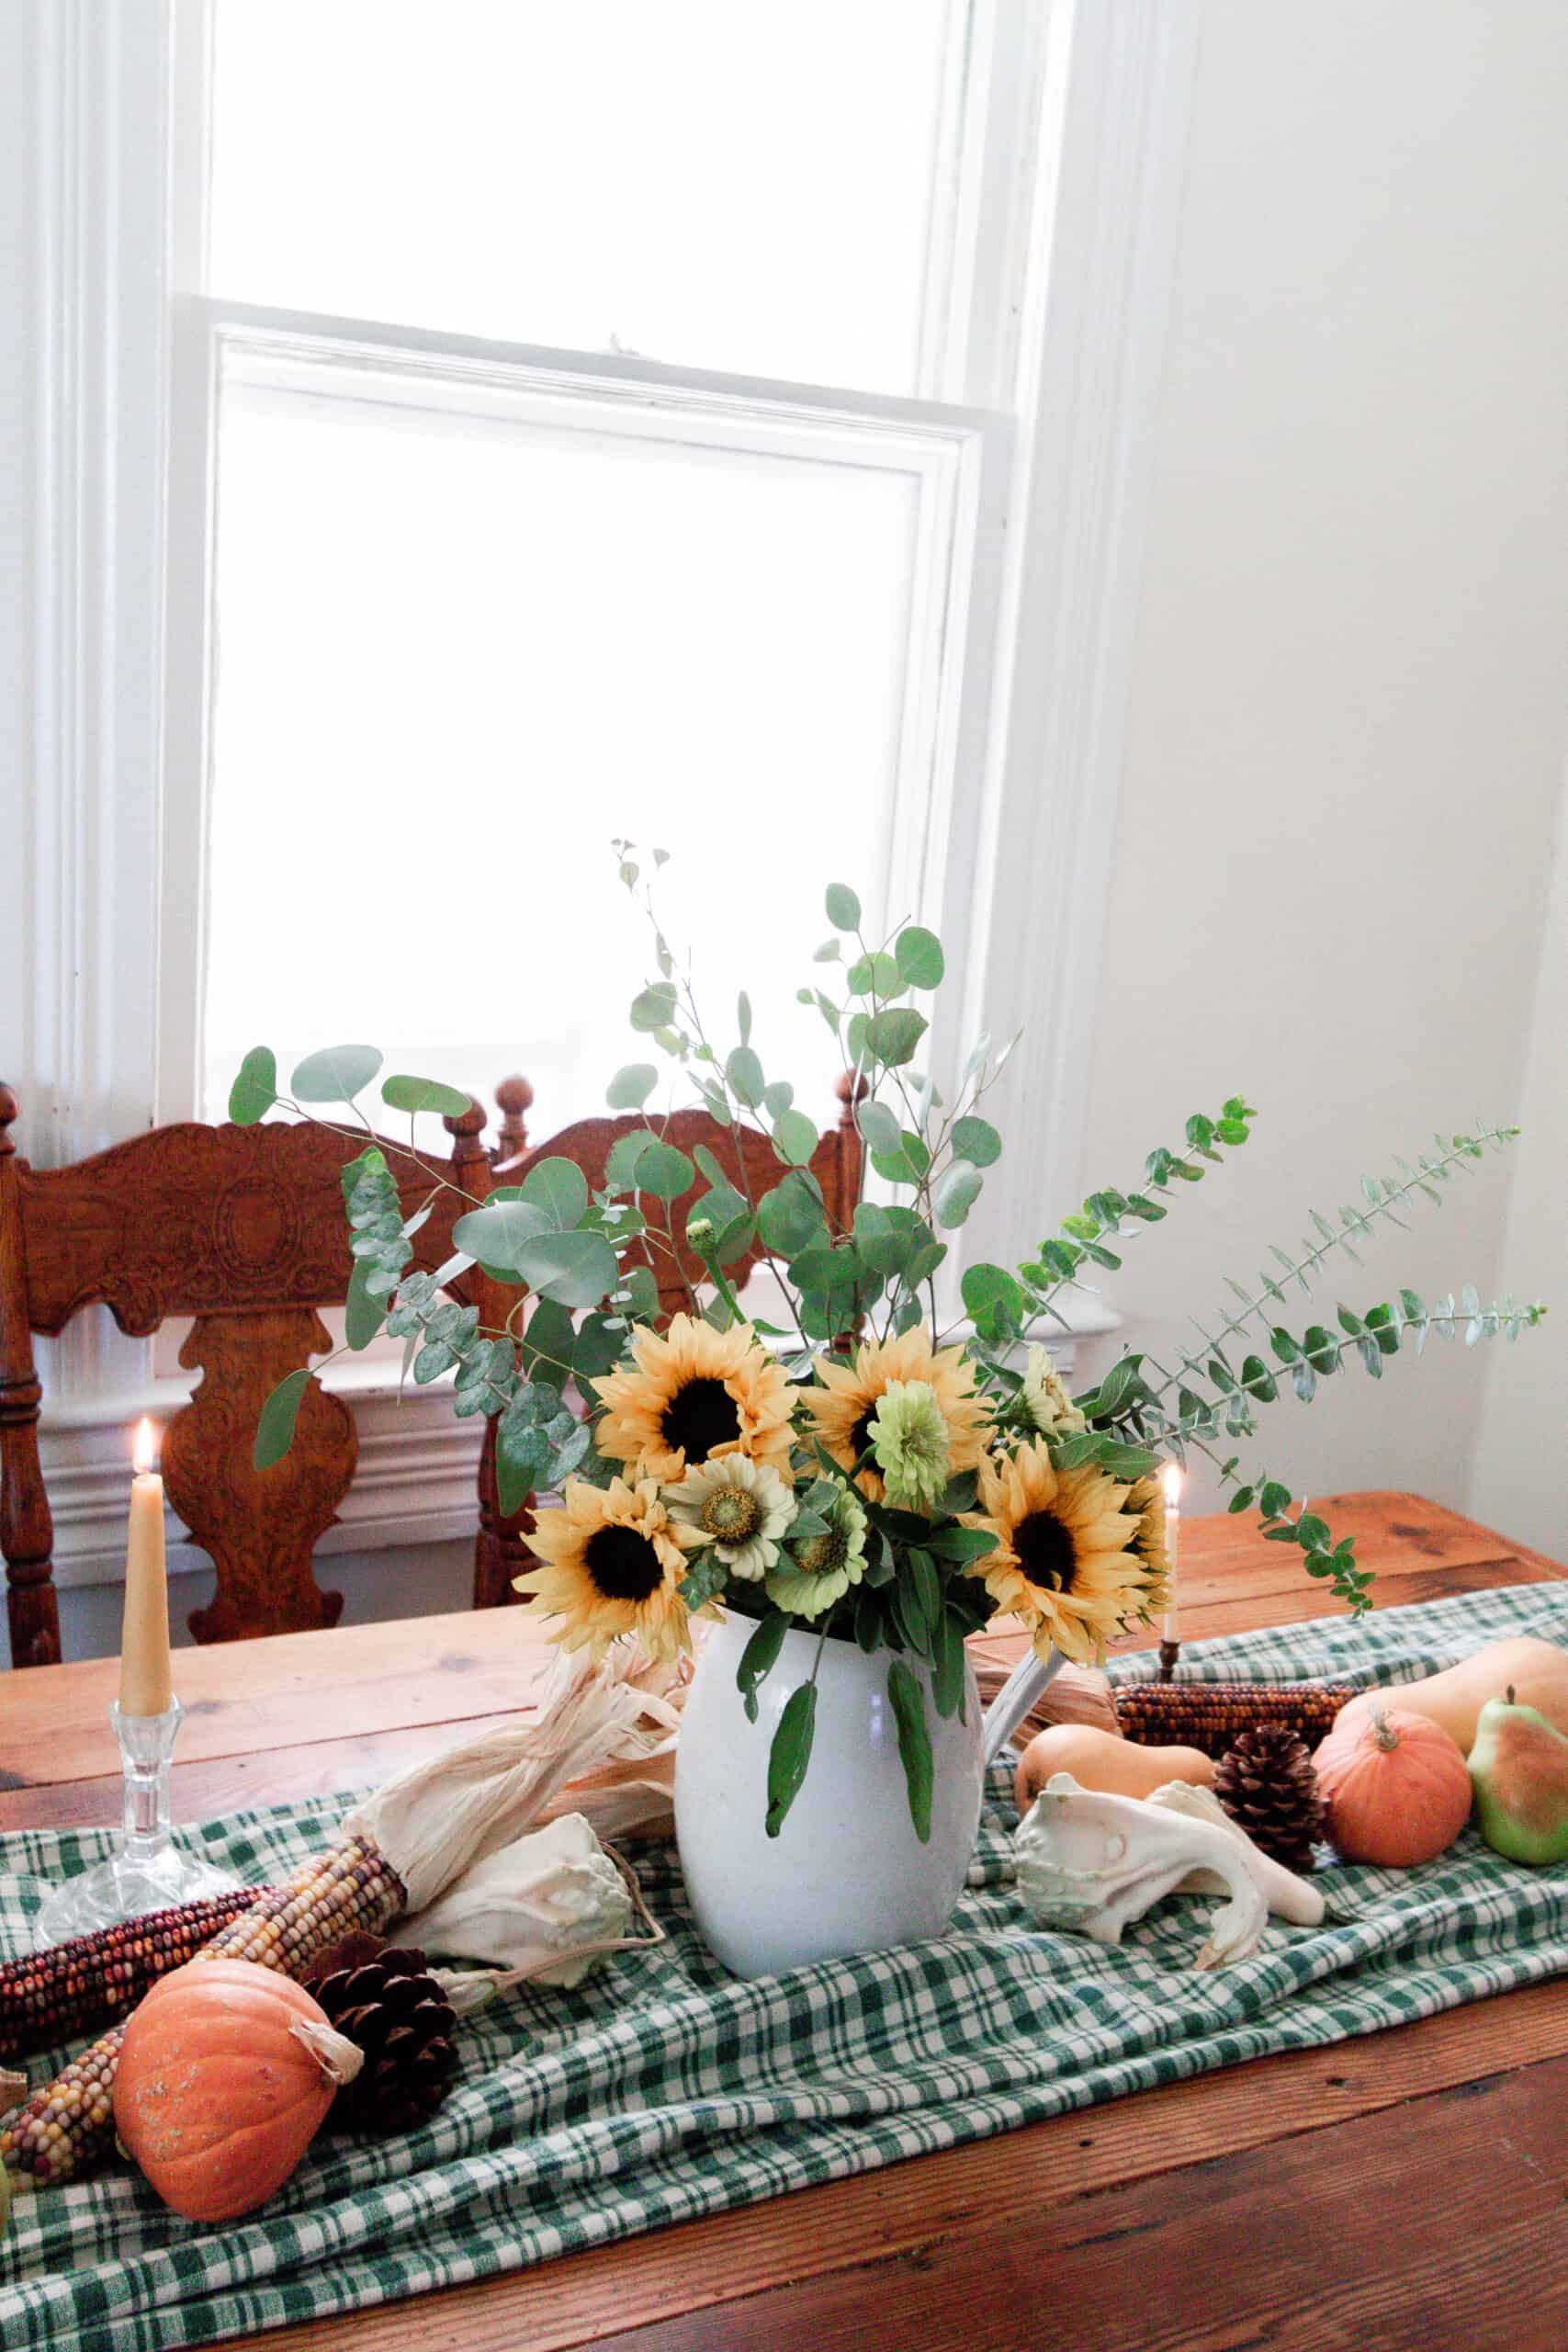 10 Dried Corn Projects for Fall Decorating